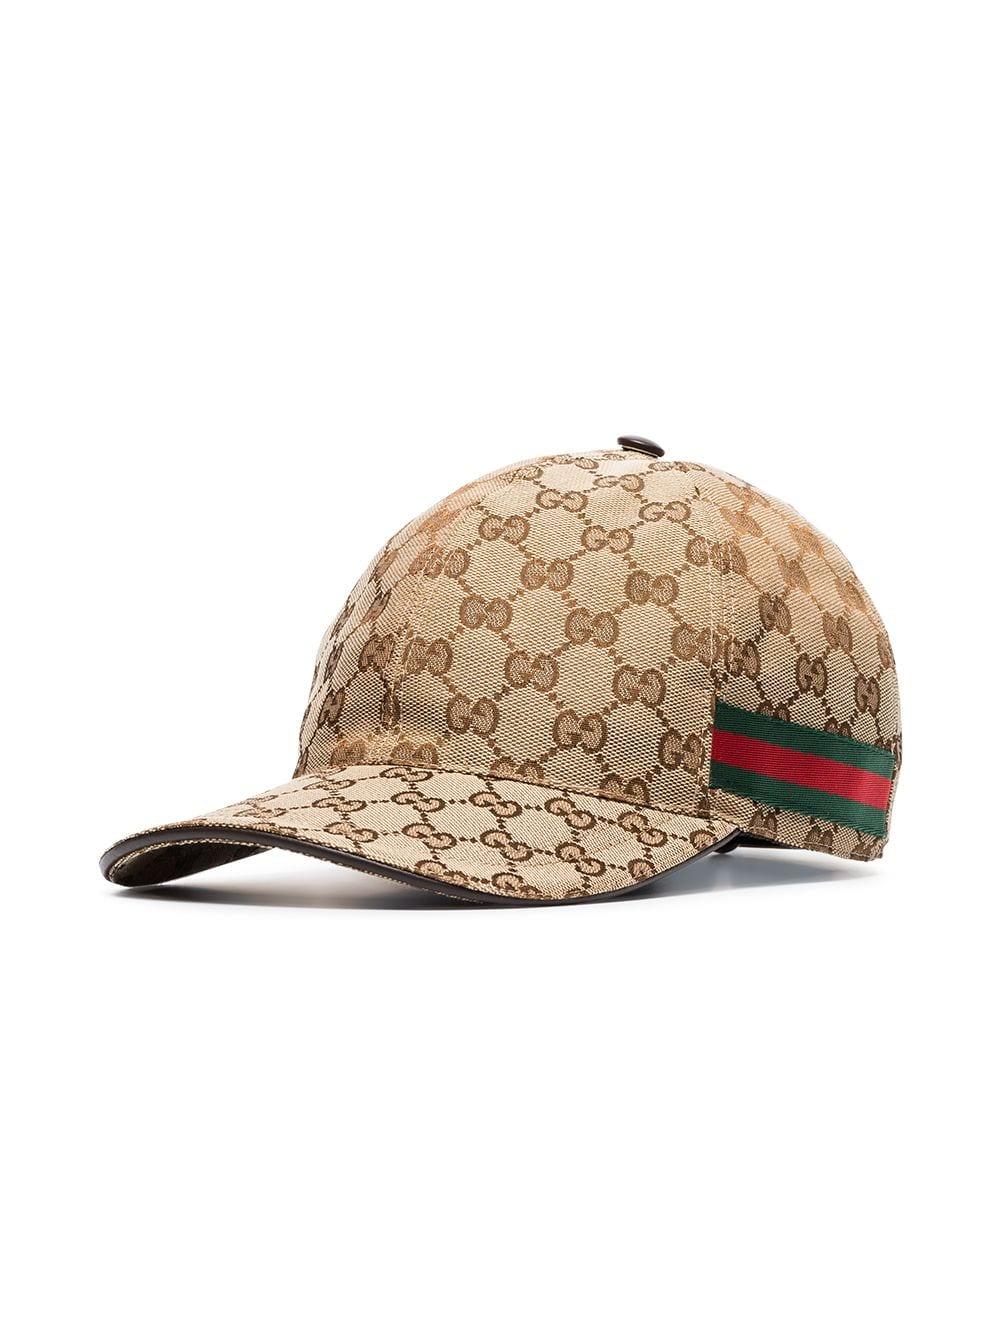 Gucci GG Supreme Canvas Baseball Cap in Brown for Men | Lyst